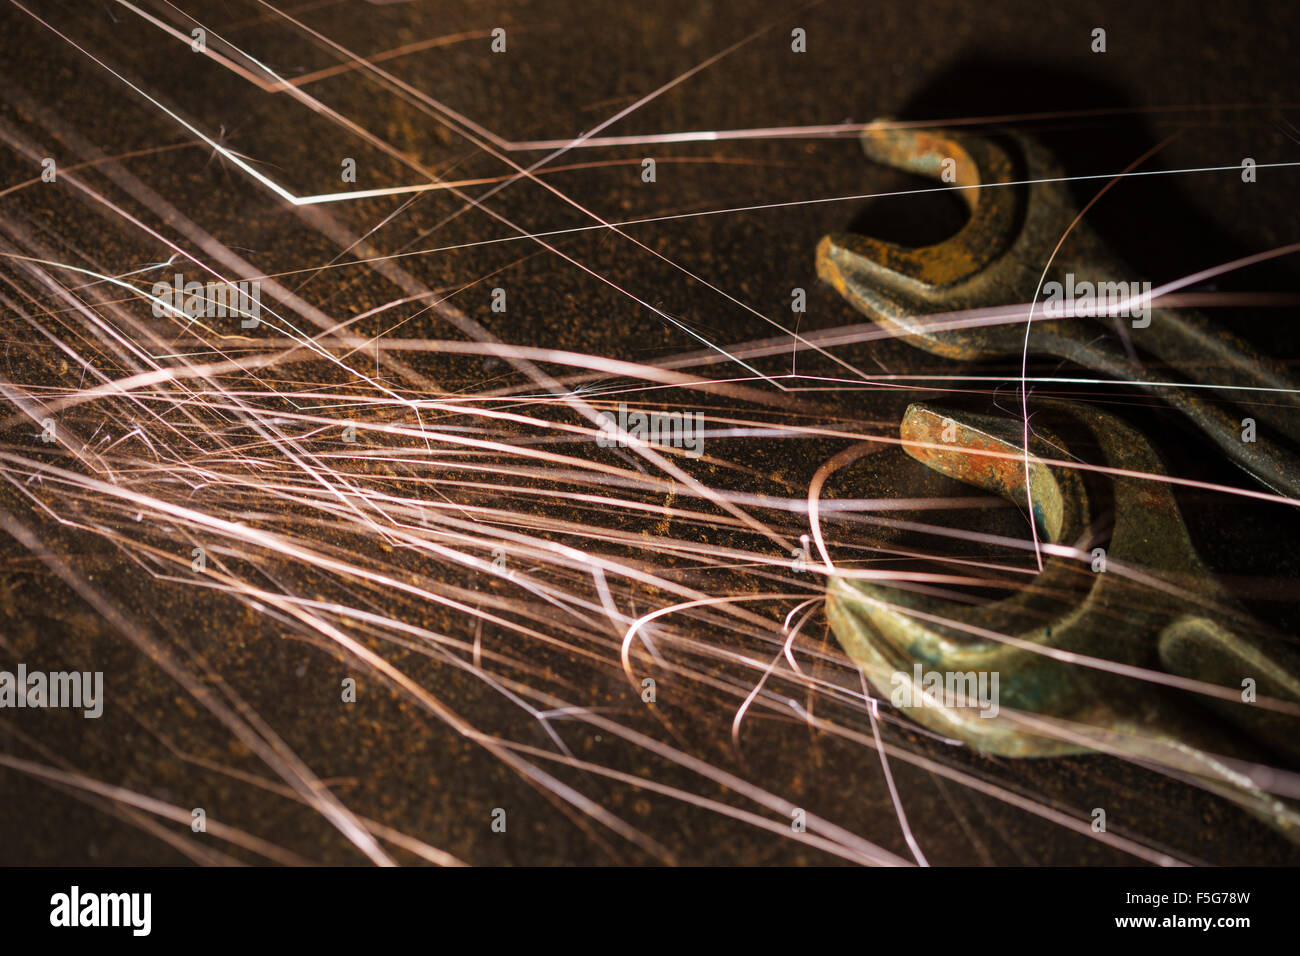 Flowing Sparks with old wrenches, industrial background Stock Photo